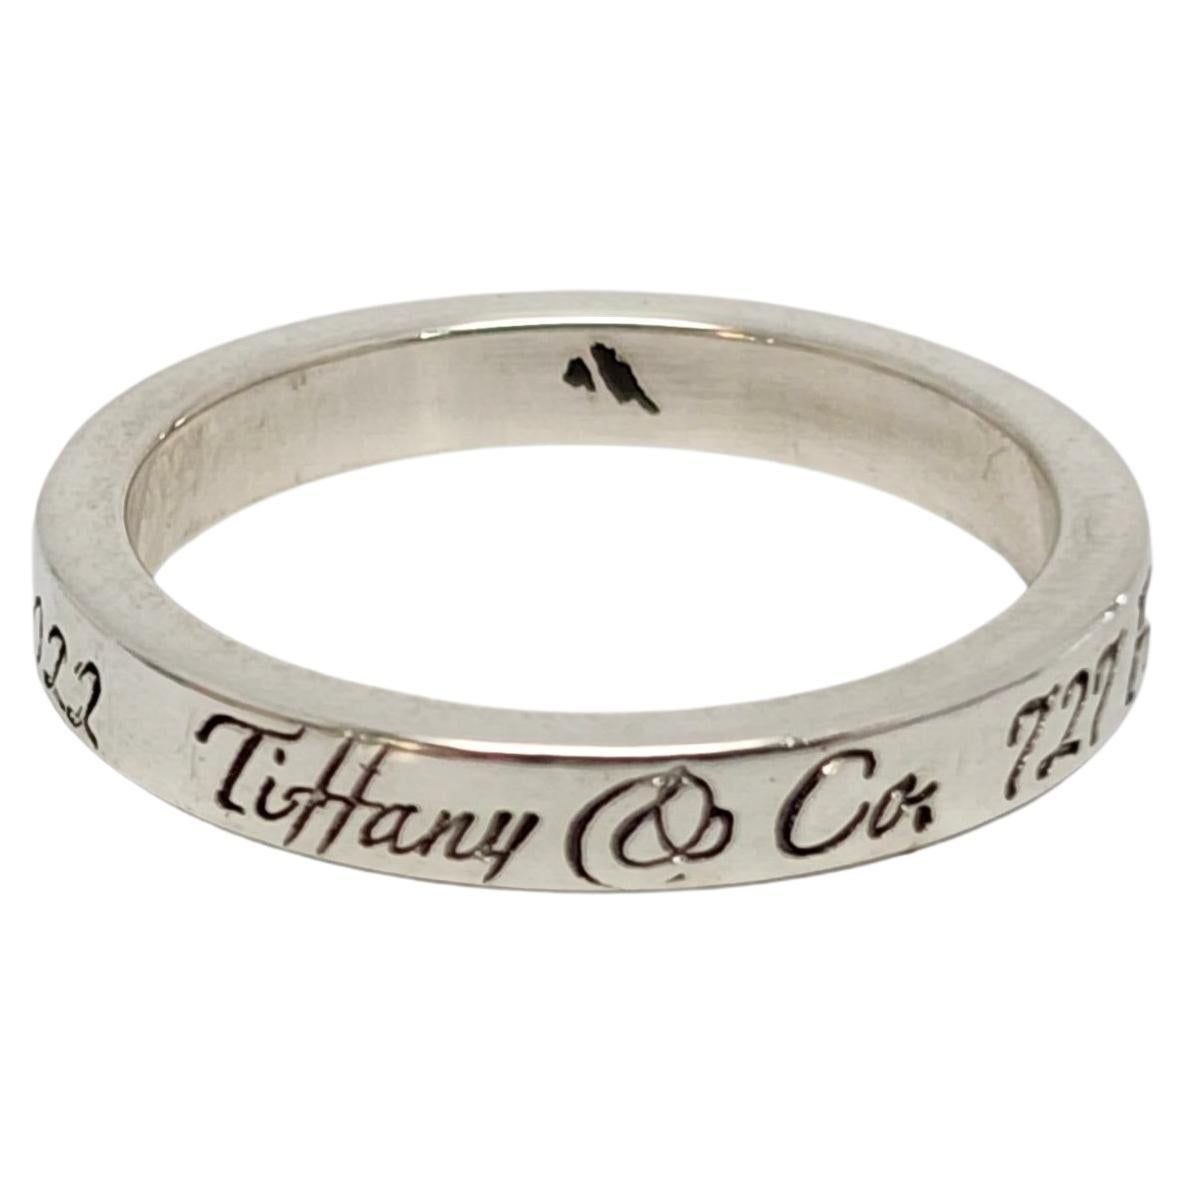 Tiffany & Co New York Address Notes Narrow Band Ring Taille 5,25 n°13007 en vente